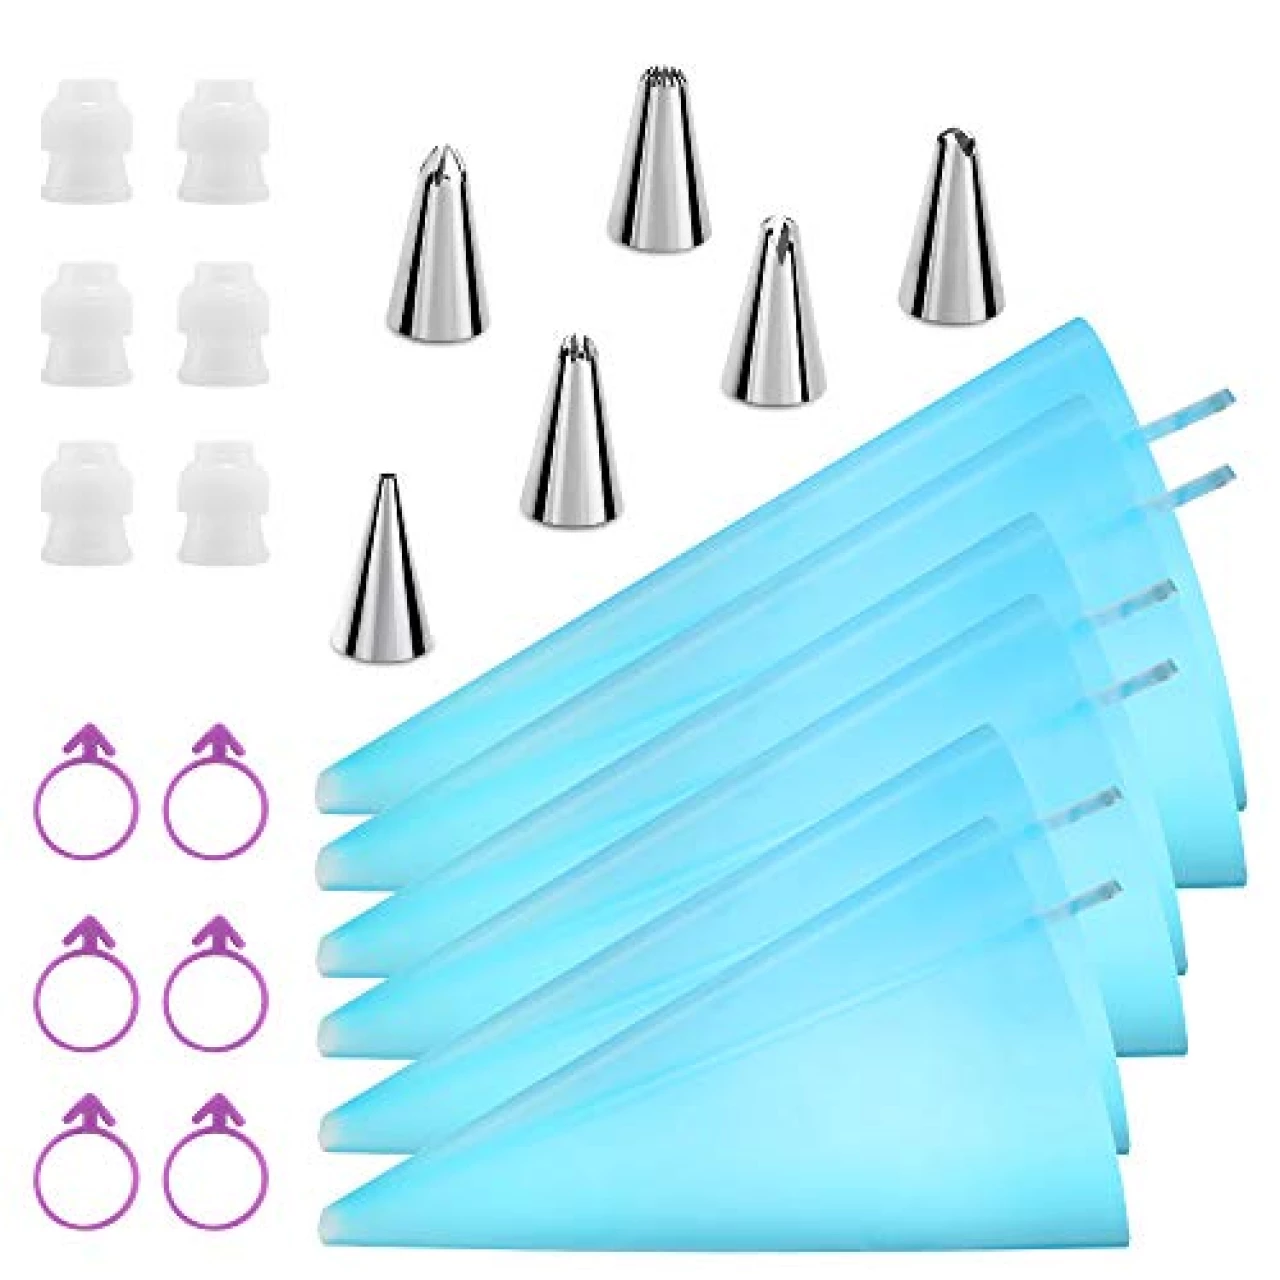 Kasmoire Reusable Piping Bags and Tips Set, Cake Decorating Tools